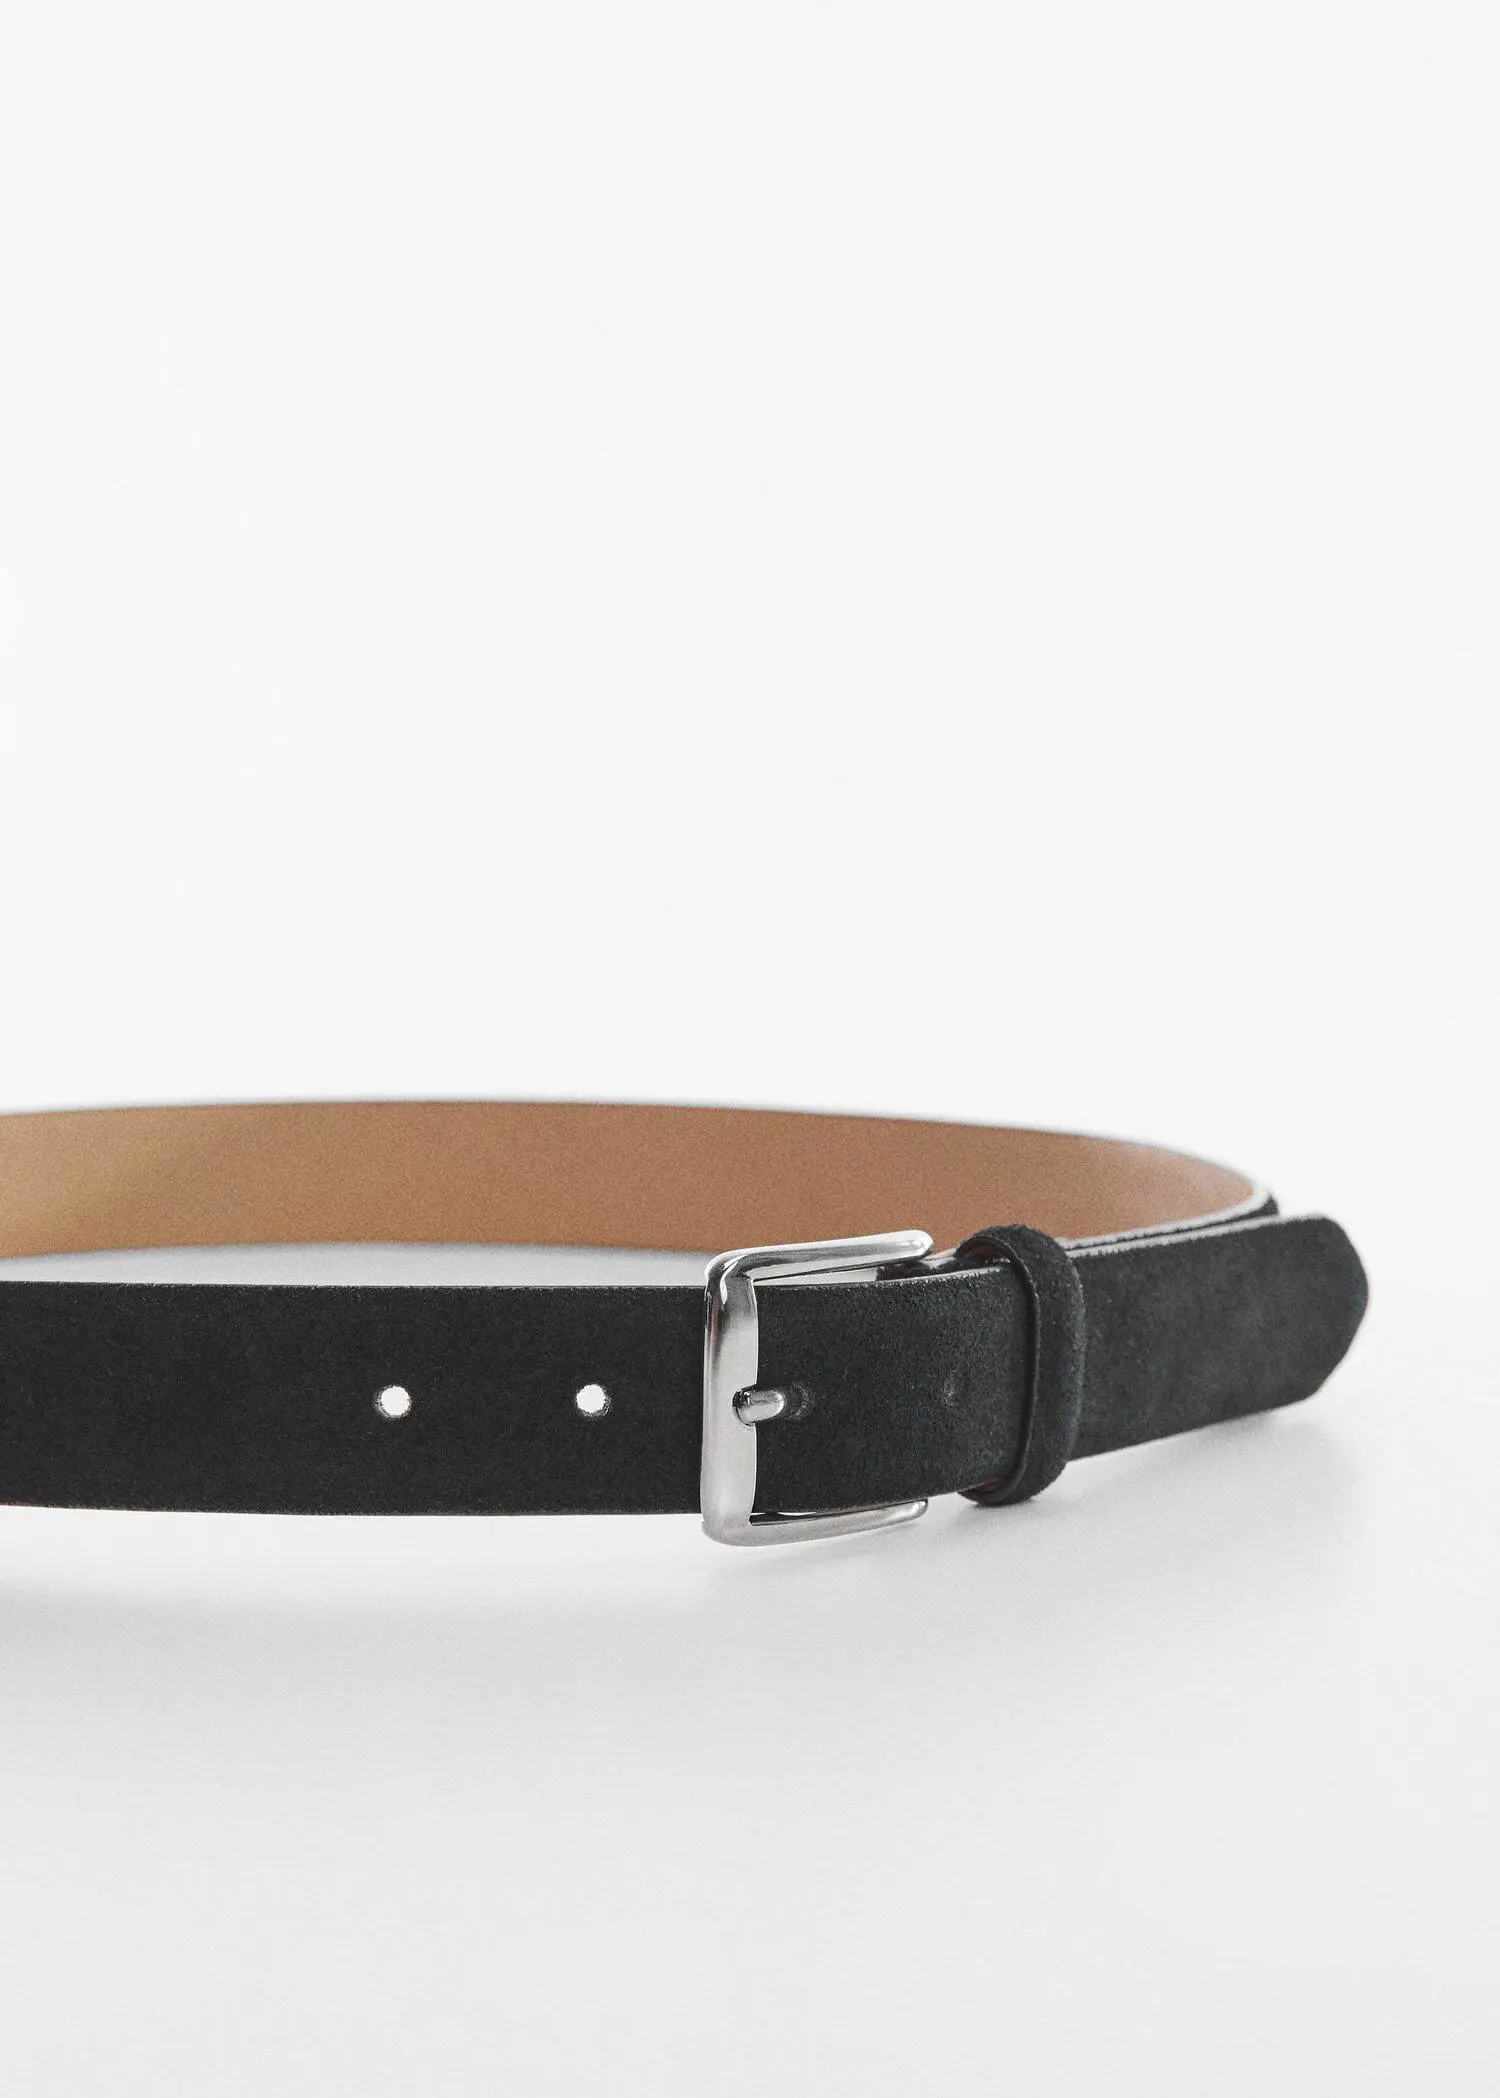 Mango Suede belt. a close-up of a black belt with a silver buckle. 